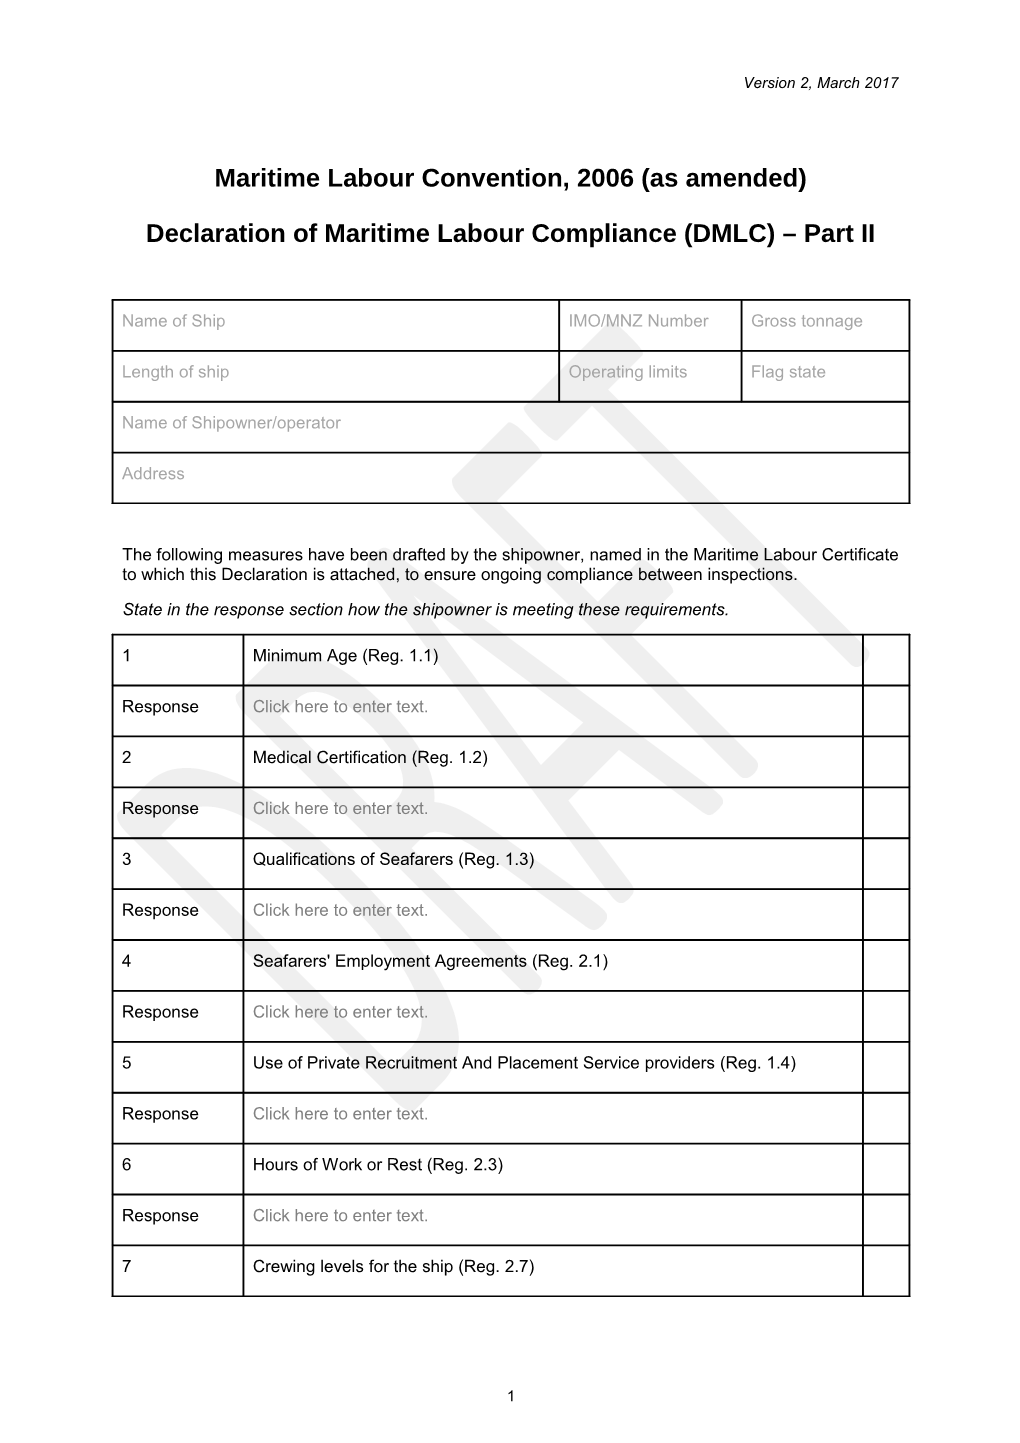 Maritime Labour Convention, 2006 (As Amended)